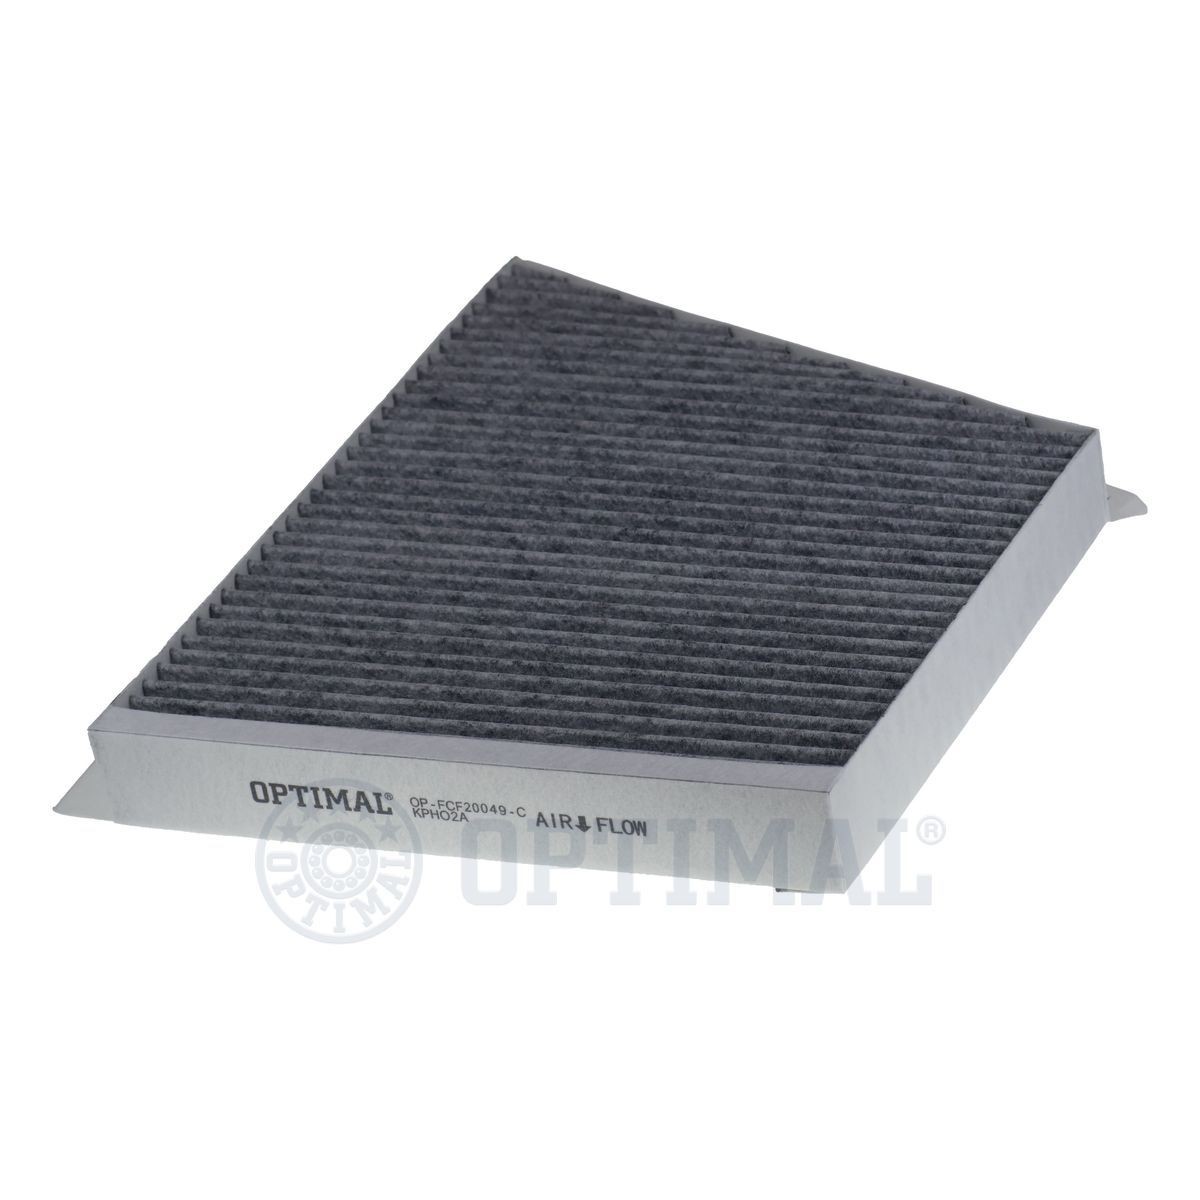 OPTIMAL Activated Carbon Filter, 312 mm x 260 mm x 35 mm Width: 260mm, Height: 35mm, Length: 312mm Cabin filter OP-FCF20049-C buy